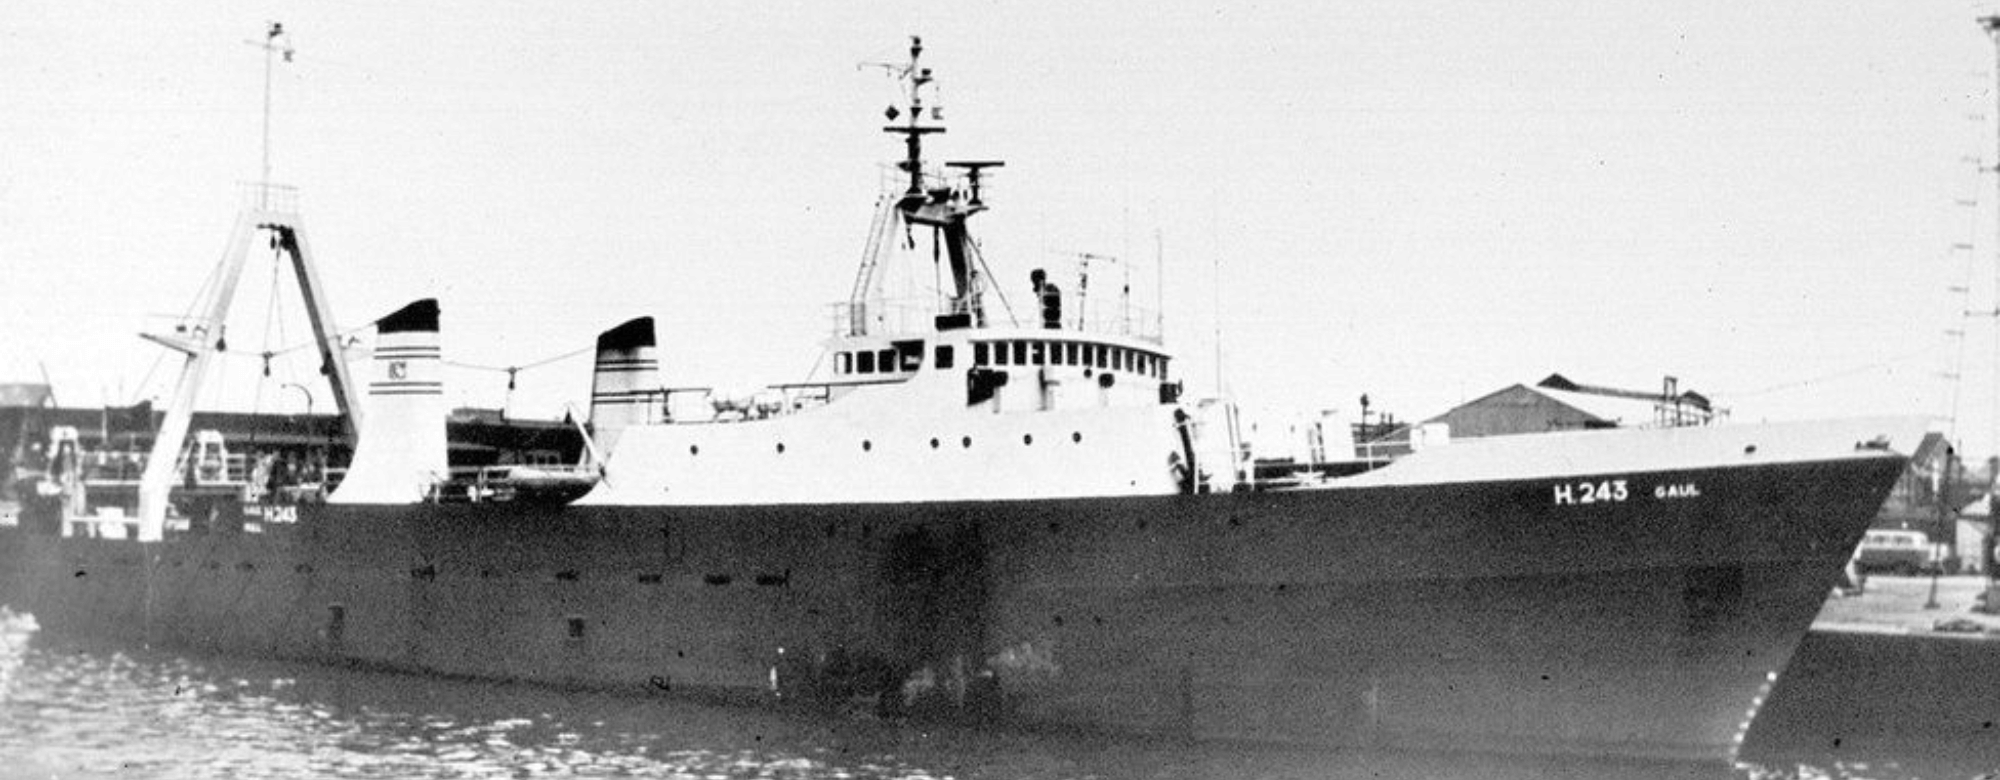 Club To Commemorate 50th Anniversary Of Gaul Trawler Tragedy